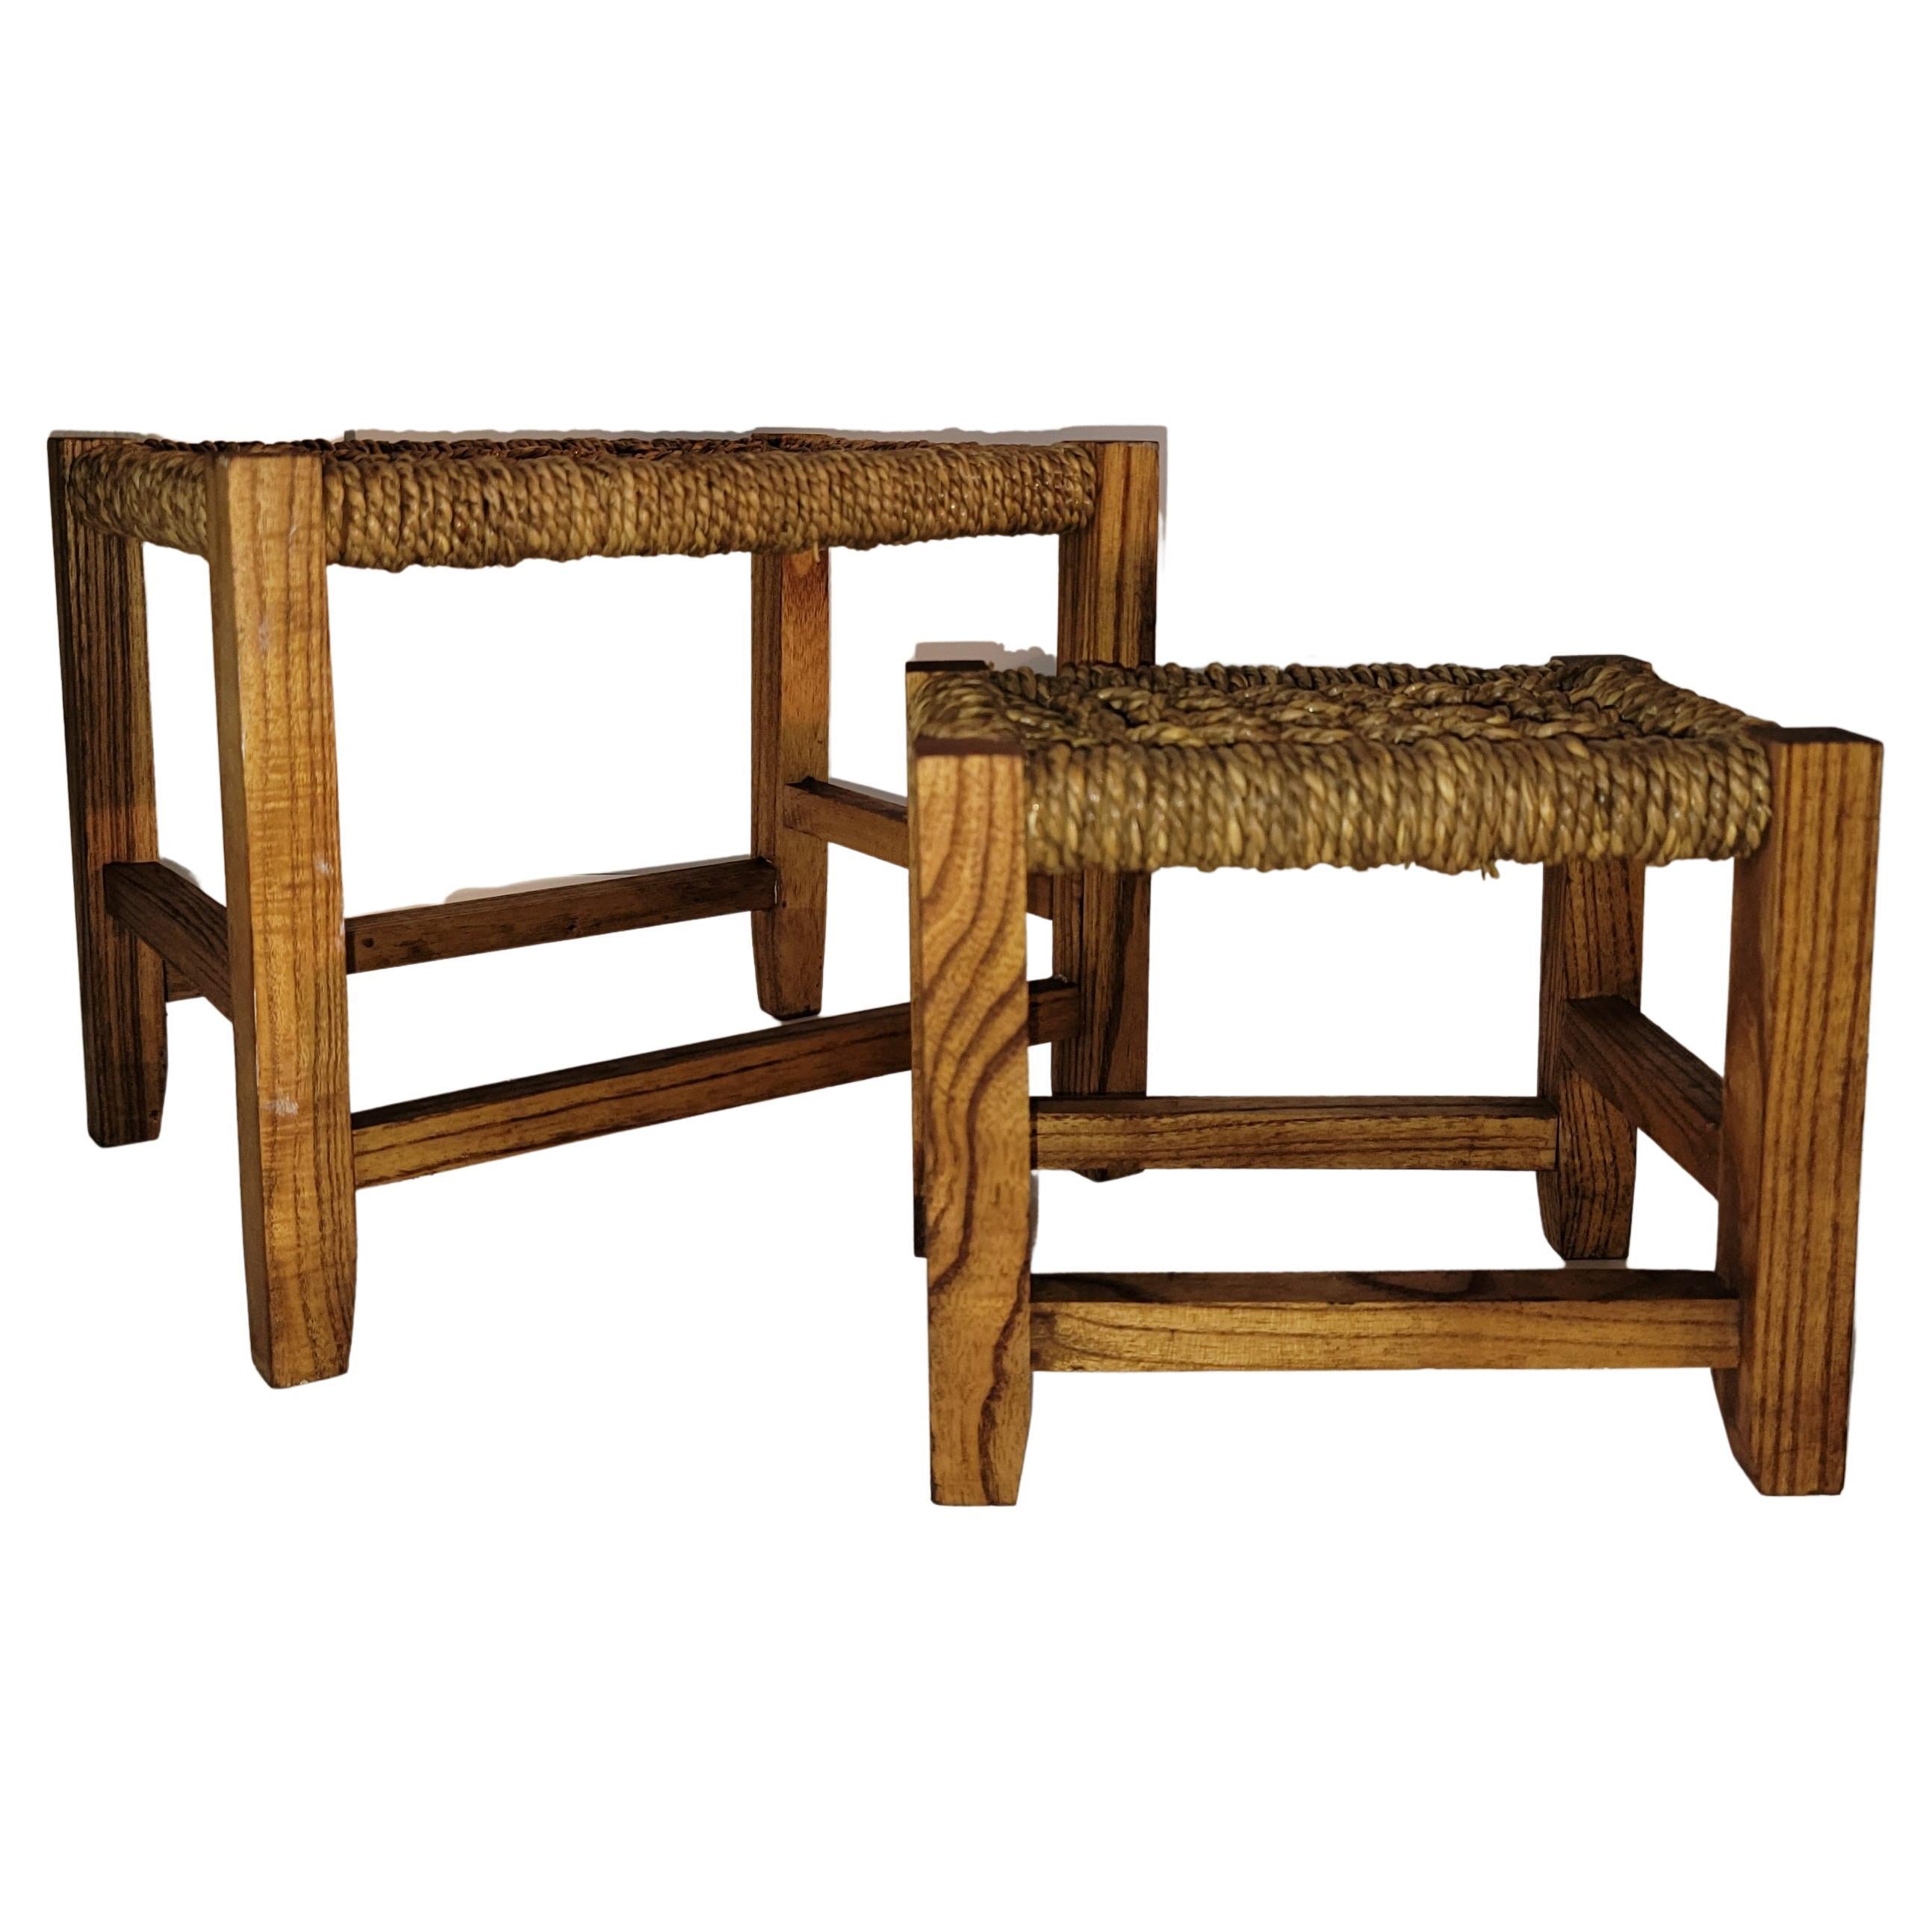 Seagrass Footstool - Pair
stool measures  - 11.5 x 10.5 x 10.5
smaller stool measures -7 x 9.5 x 8